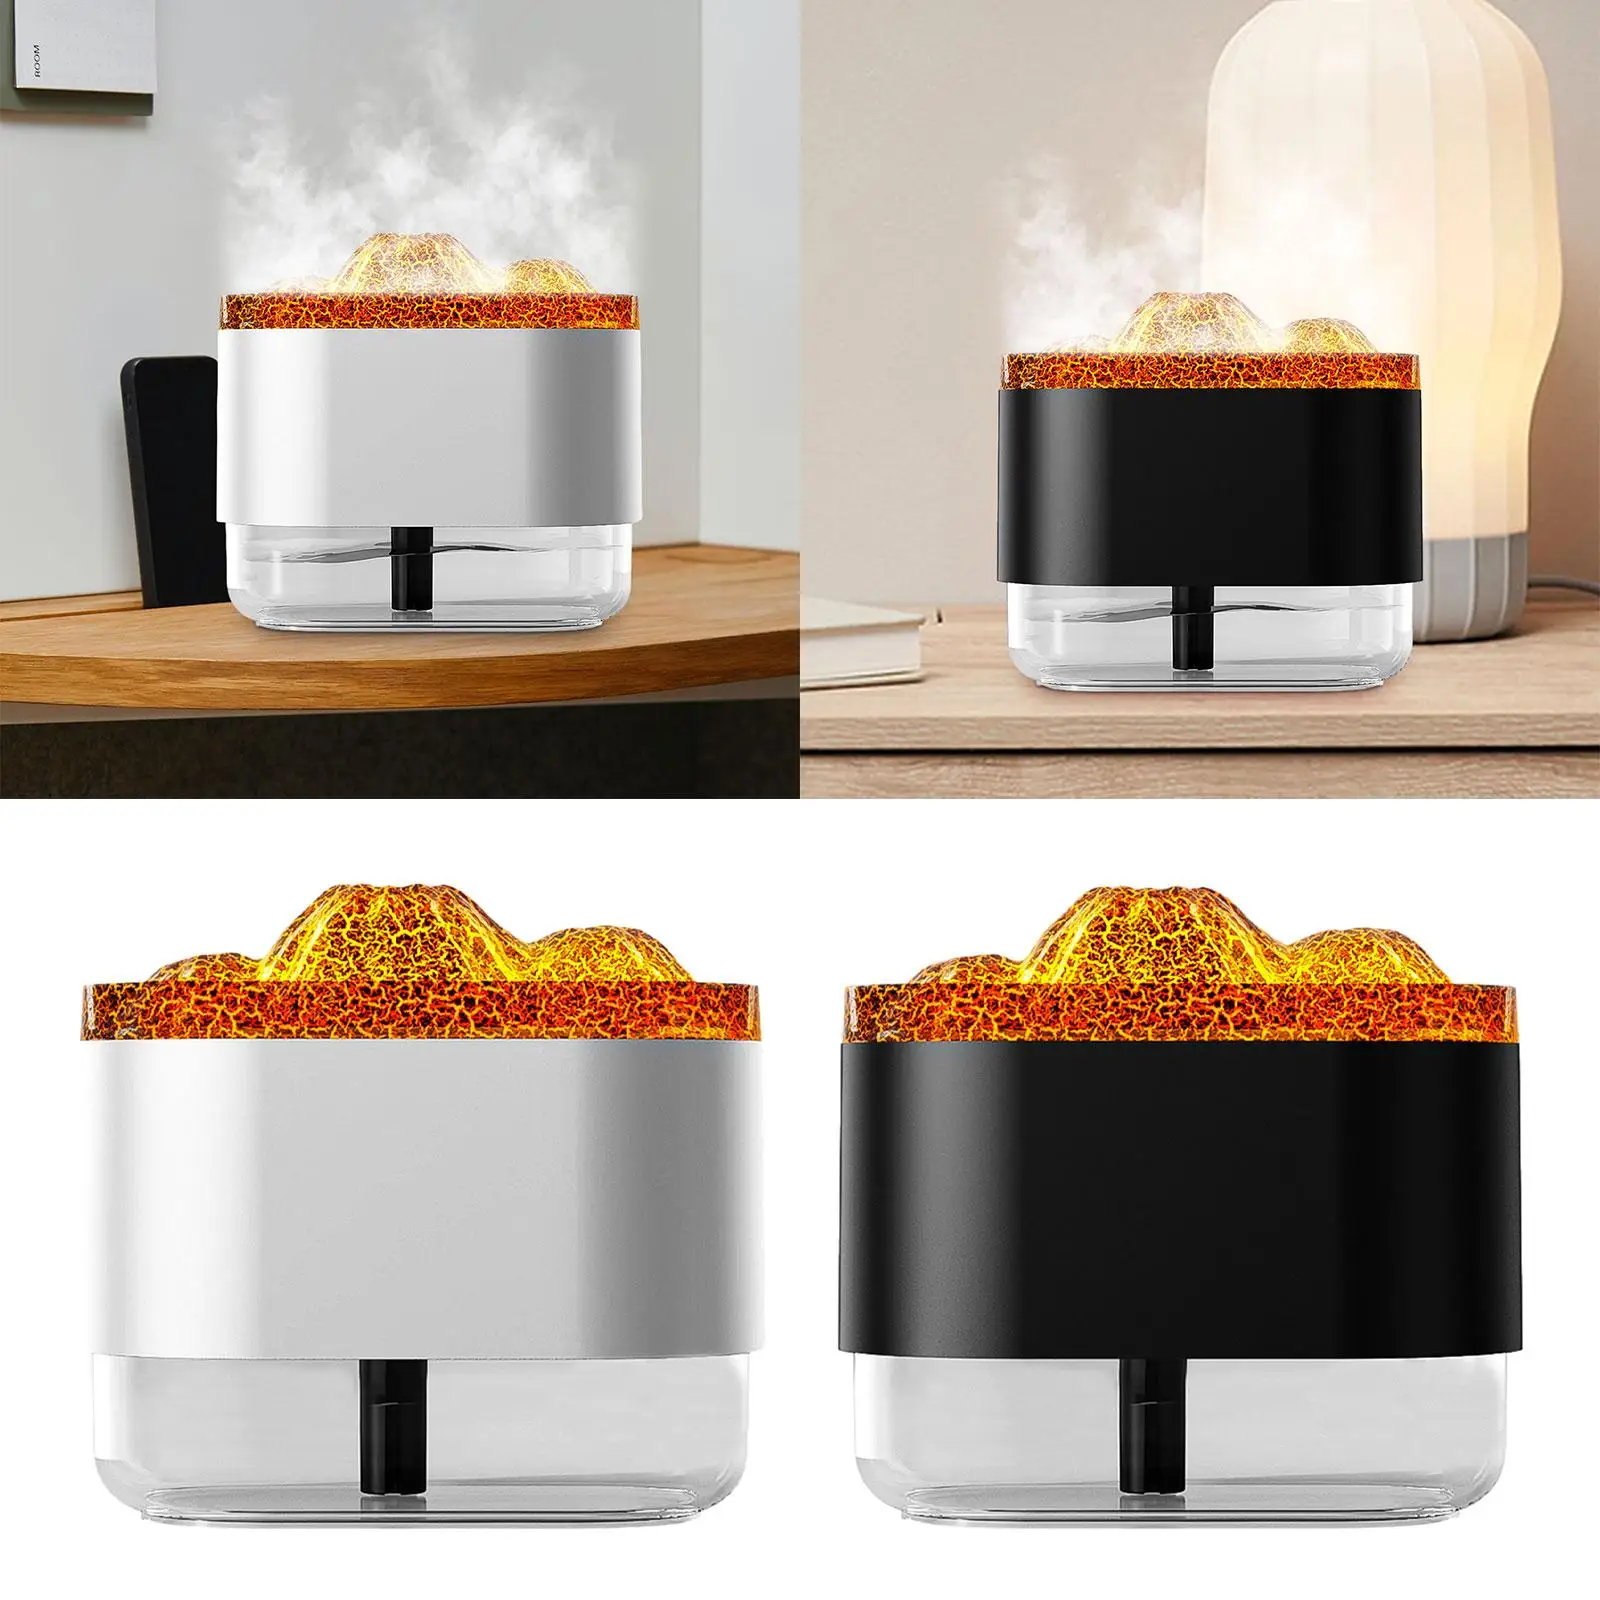 300ml USB Simulated Volcano Bedroom Humidifier Quiet Auto Shut Off with Night Light Personal Humidifier for Doing Yoga Versatile